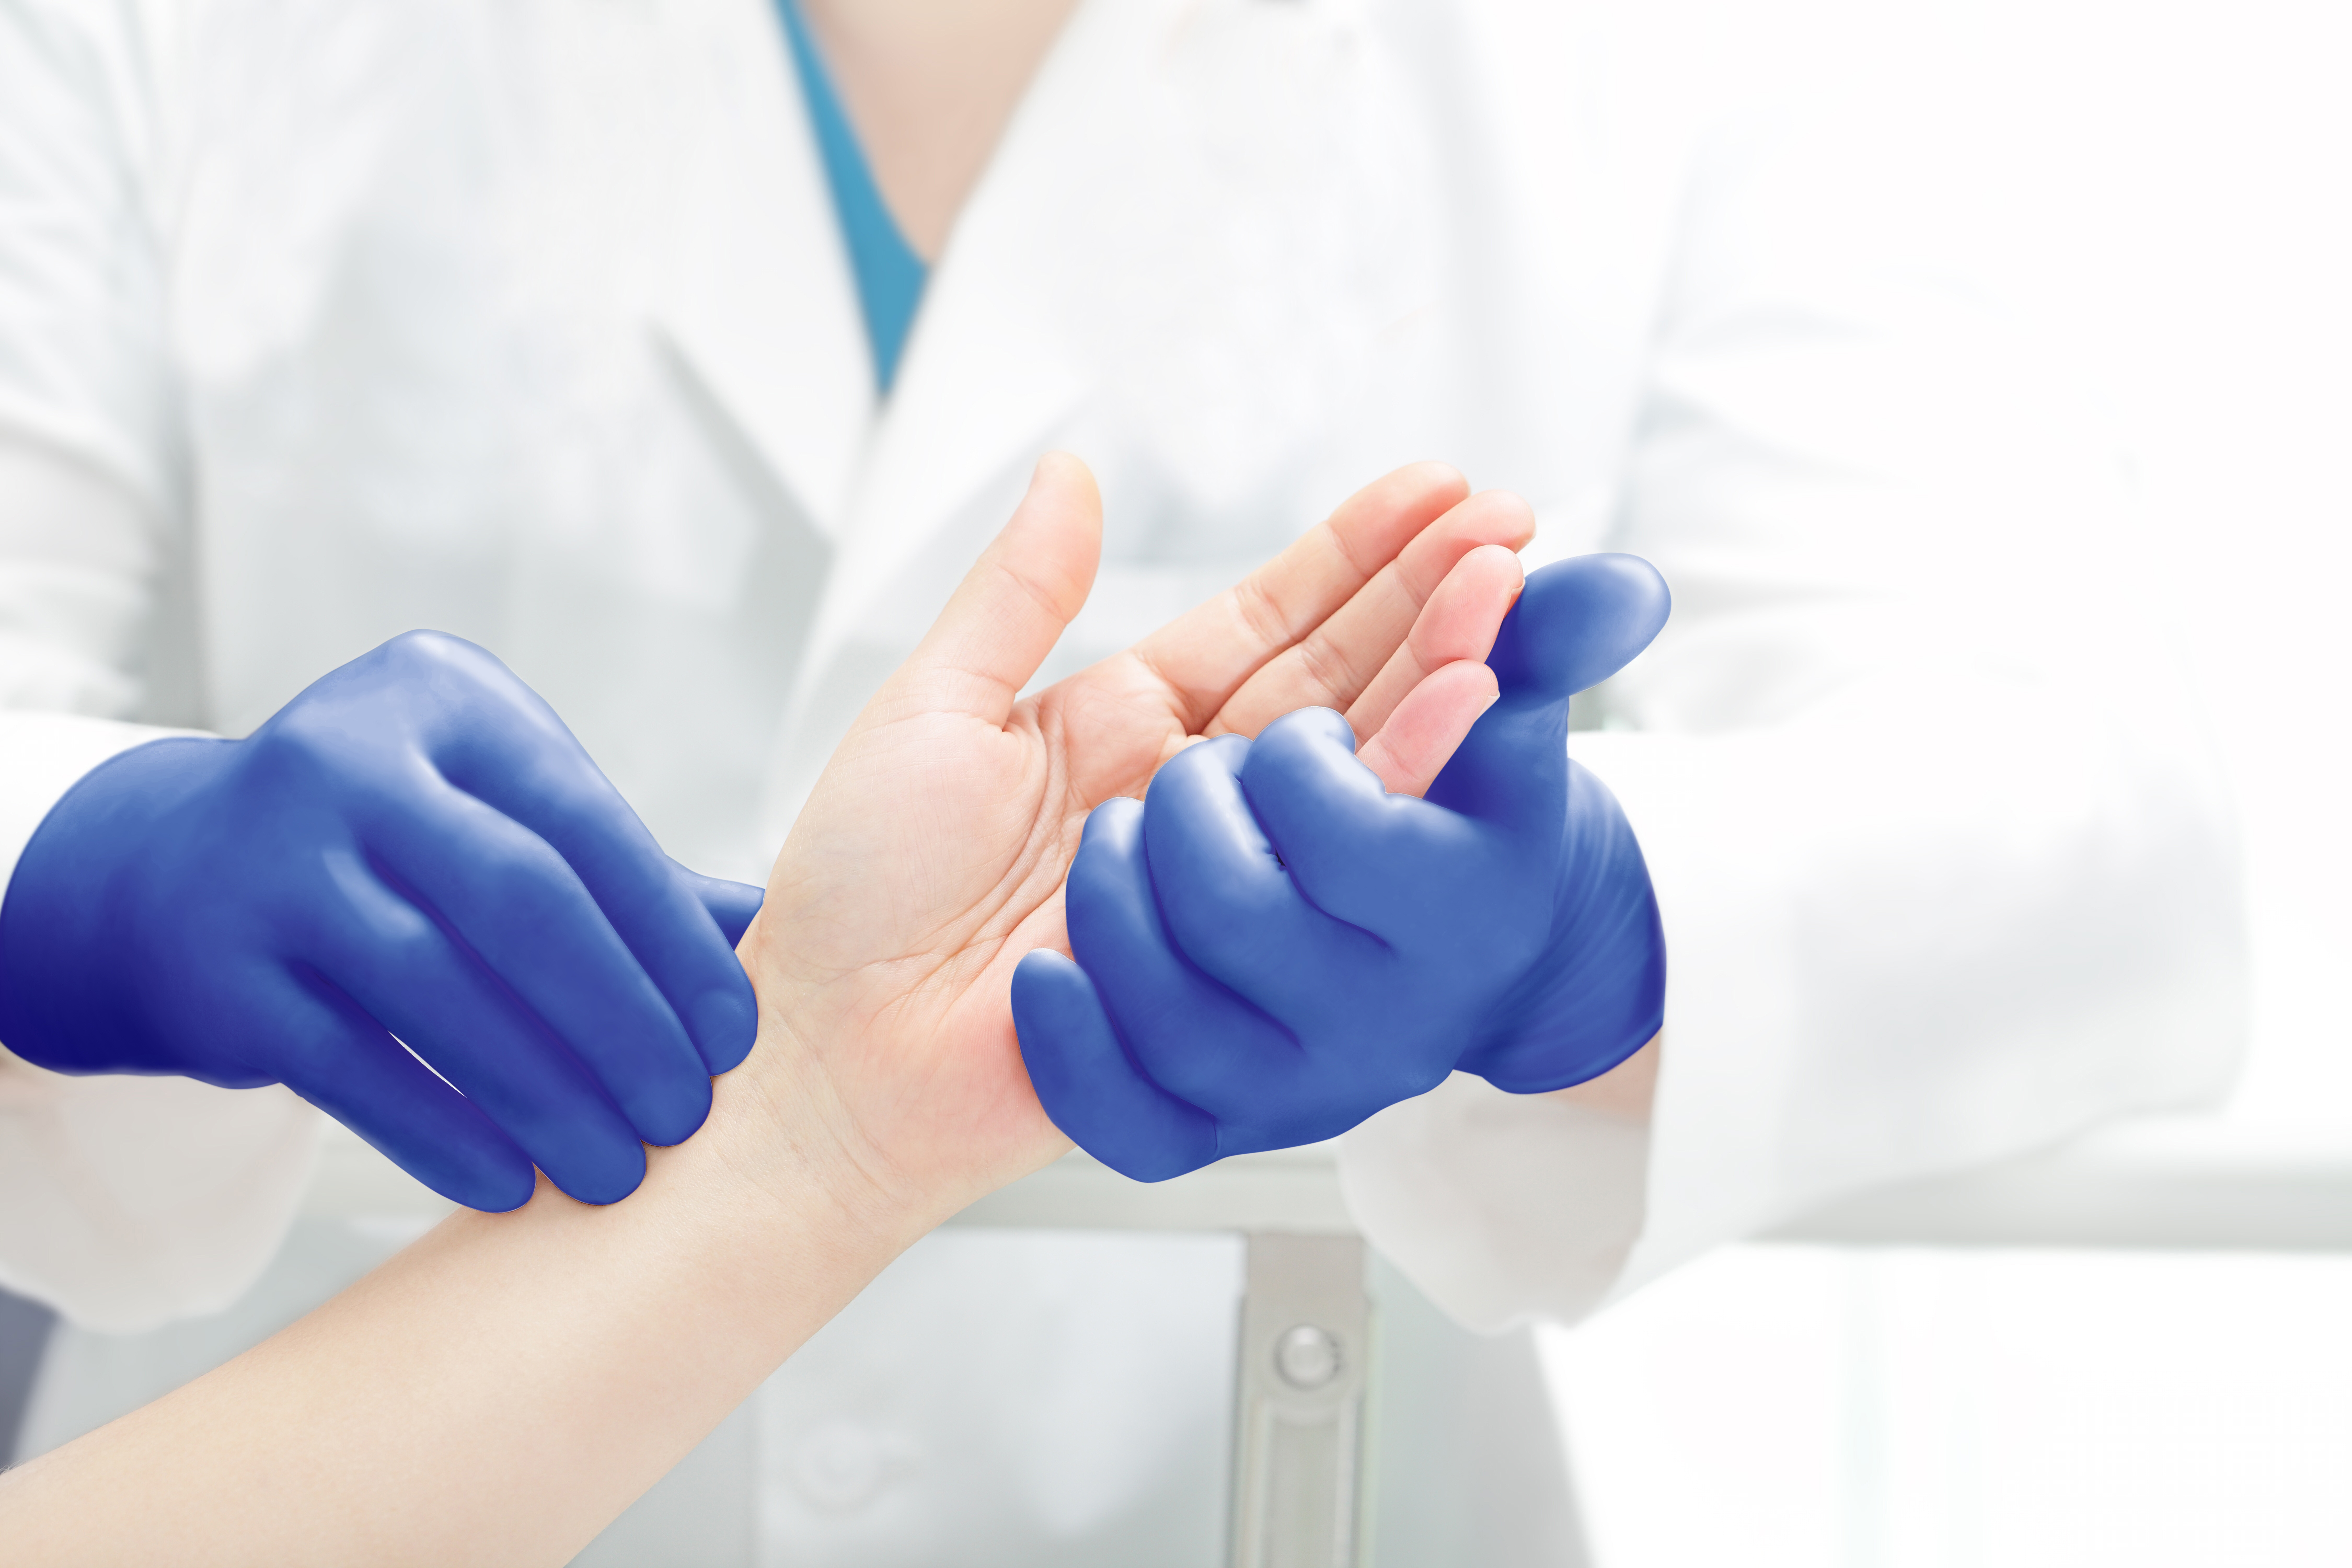 MICRO-TOUCH Blue Nitrile Primary Healthcare Application - Doctor Examining Hand (1).jpg